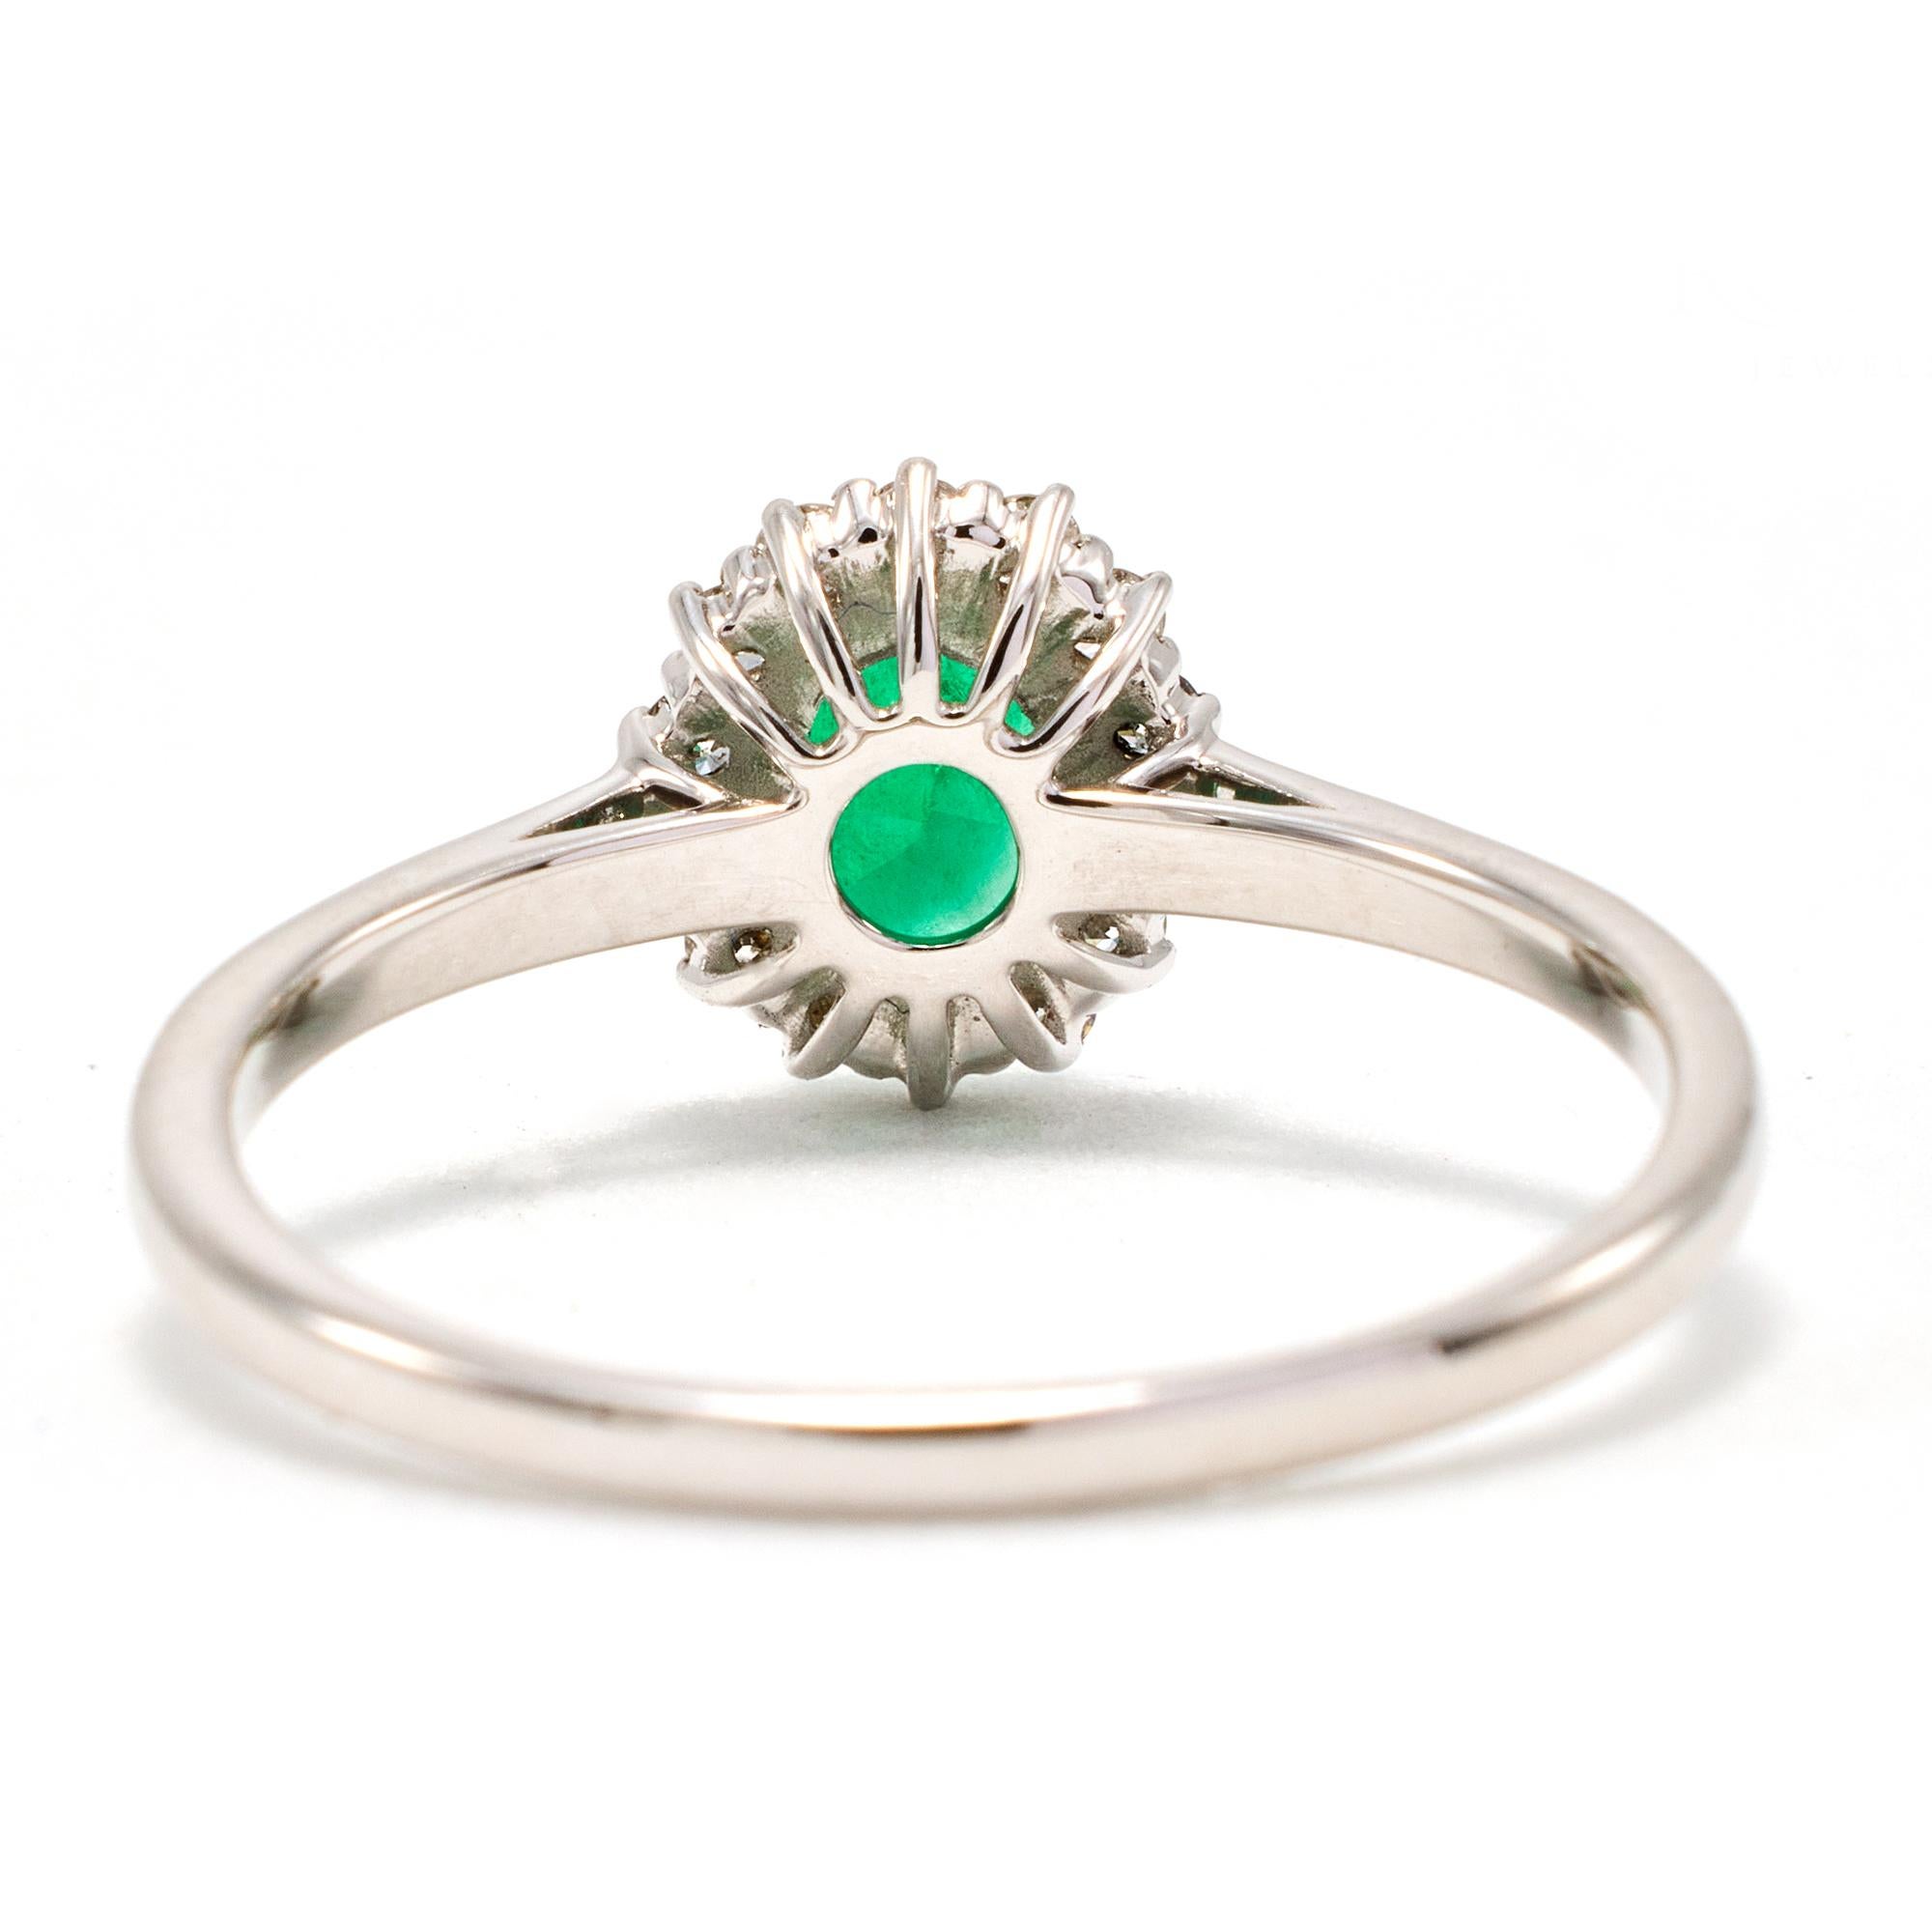 Oval Cut Oval Colombian Emerald Ring with Diamonds Around Set in 18k White Gold For Sale